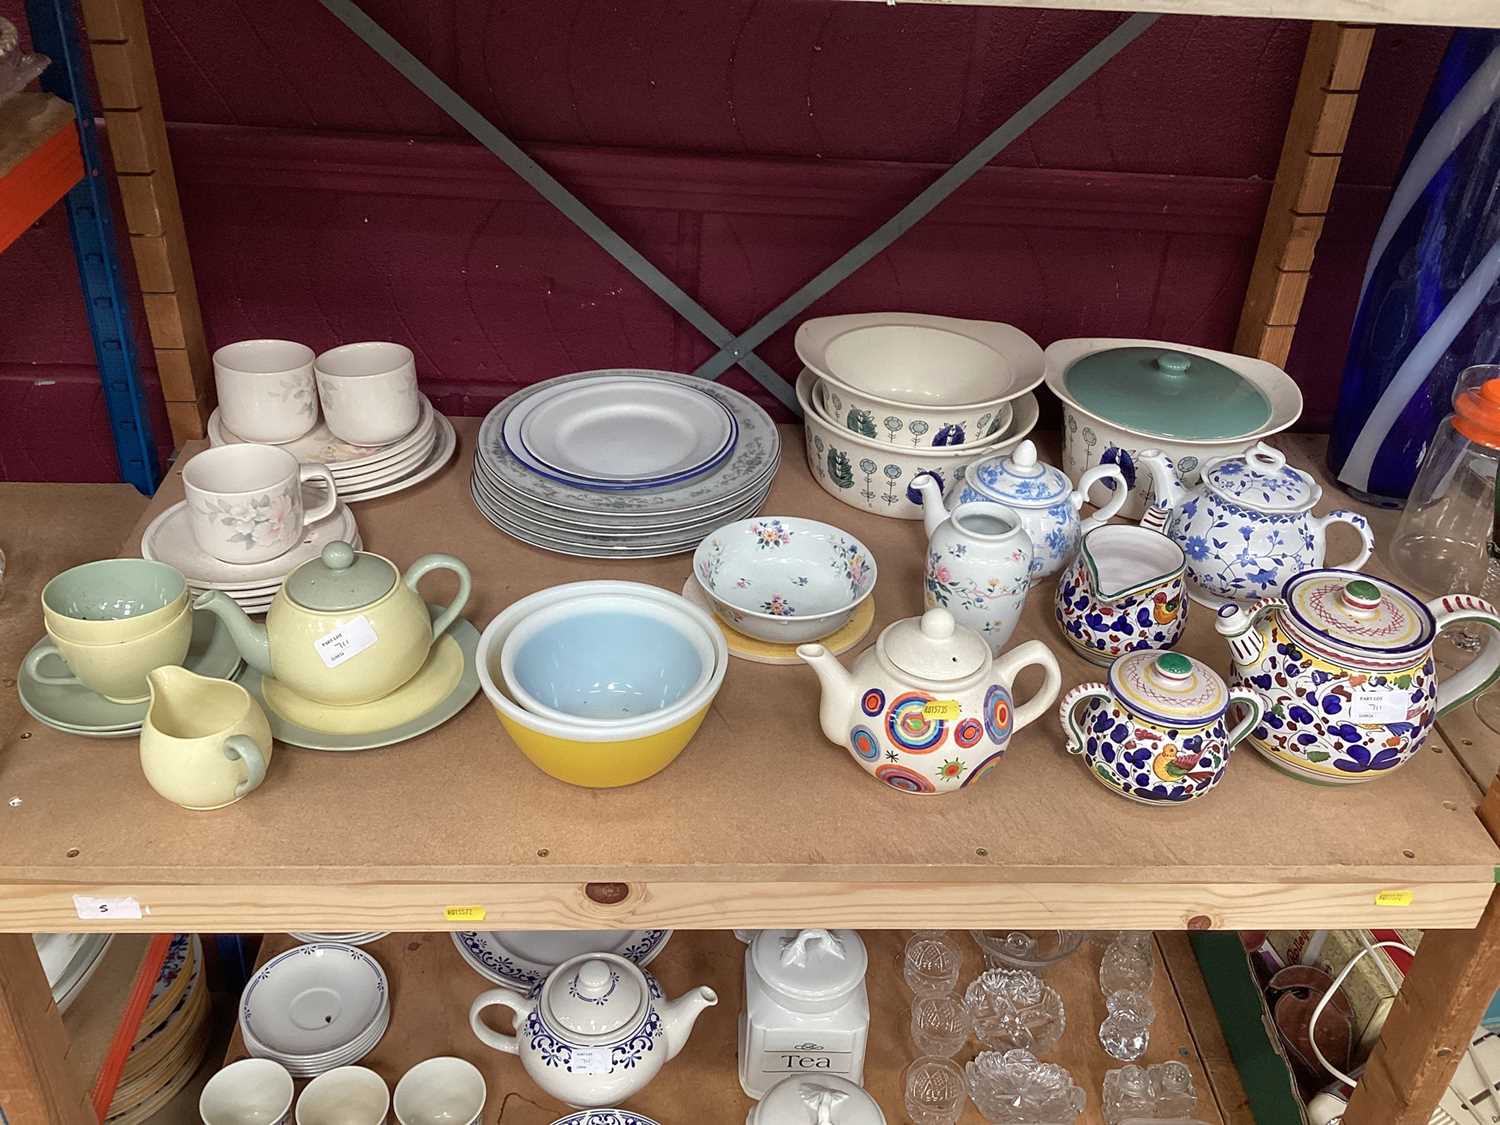 Selection of tea ware, glassware and storage jars (3 shelves) - Image 2 of 6